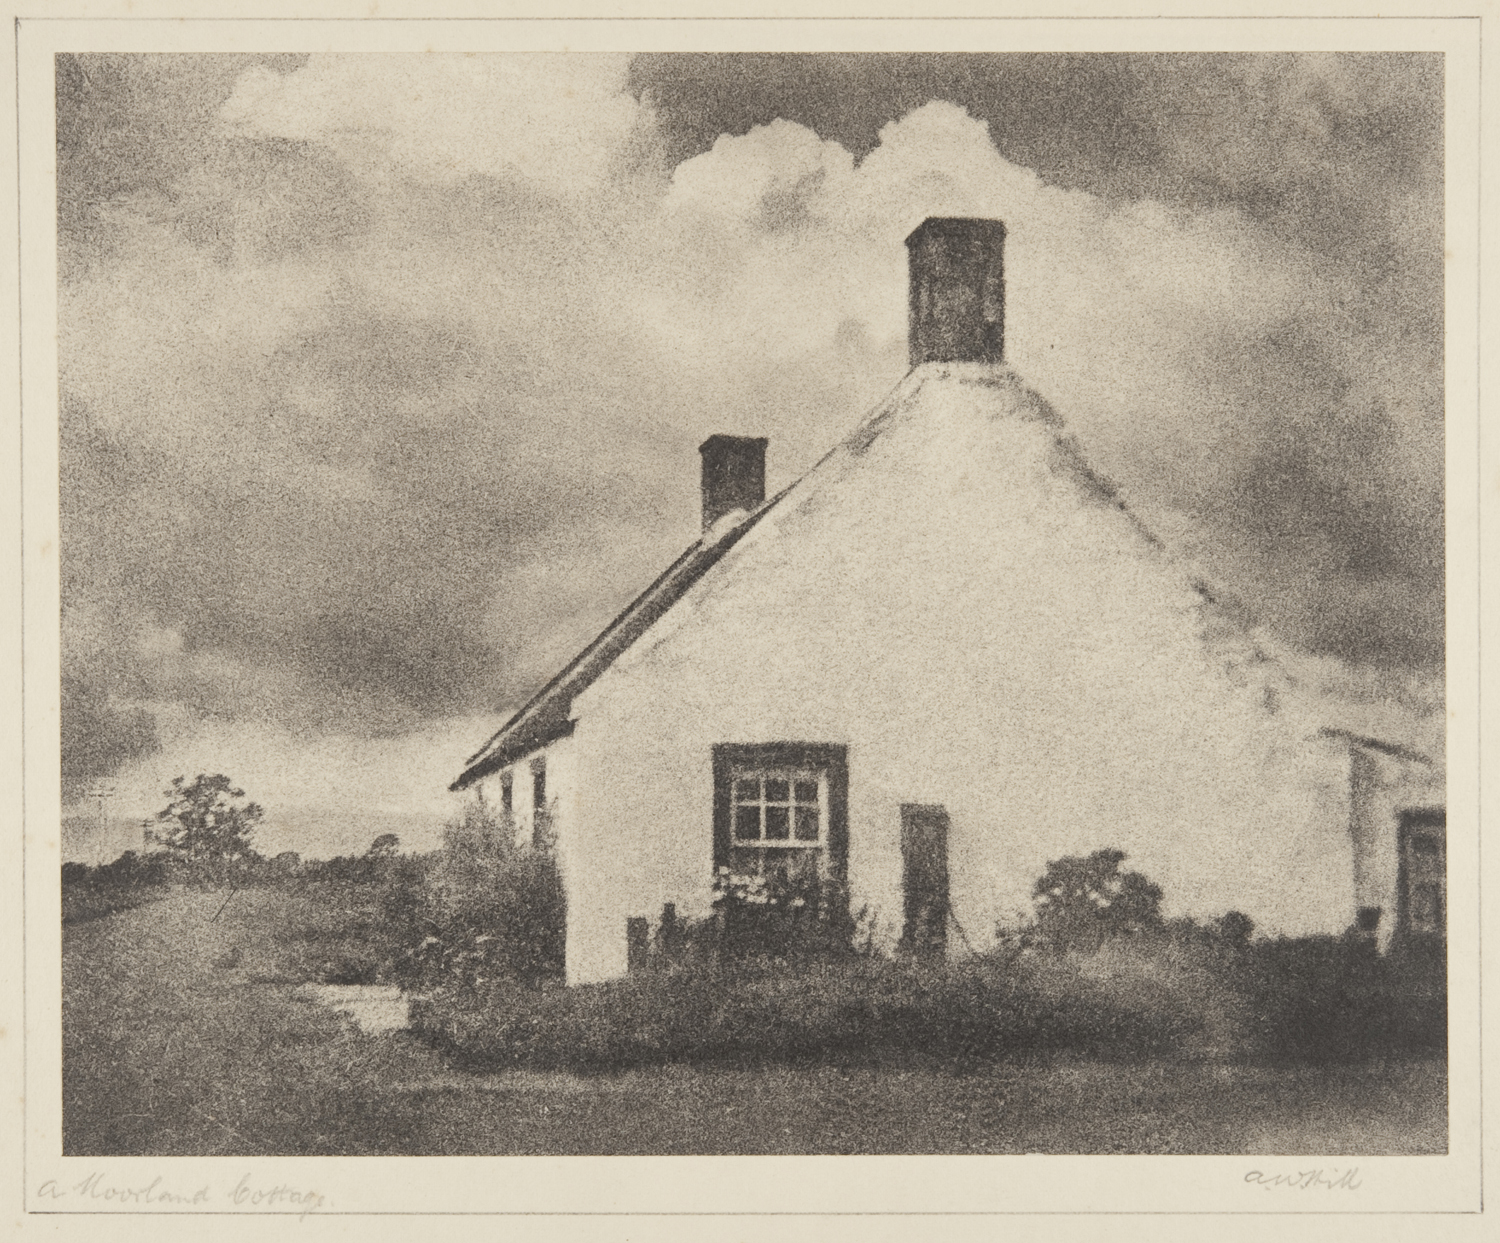 "A moorland cottage", bromoil transfer print, date unknown ca.1920s-30s, by Alexander Wilson Hill (1867-1949)